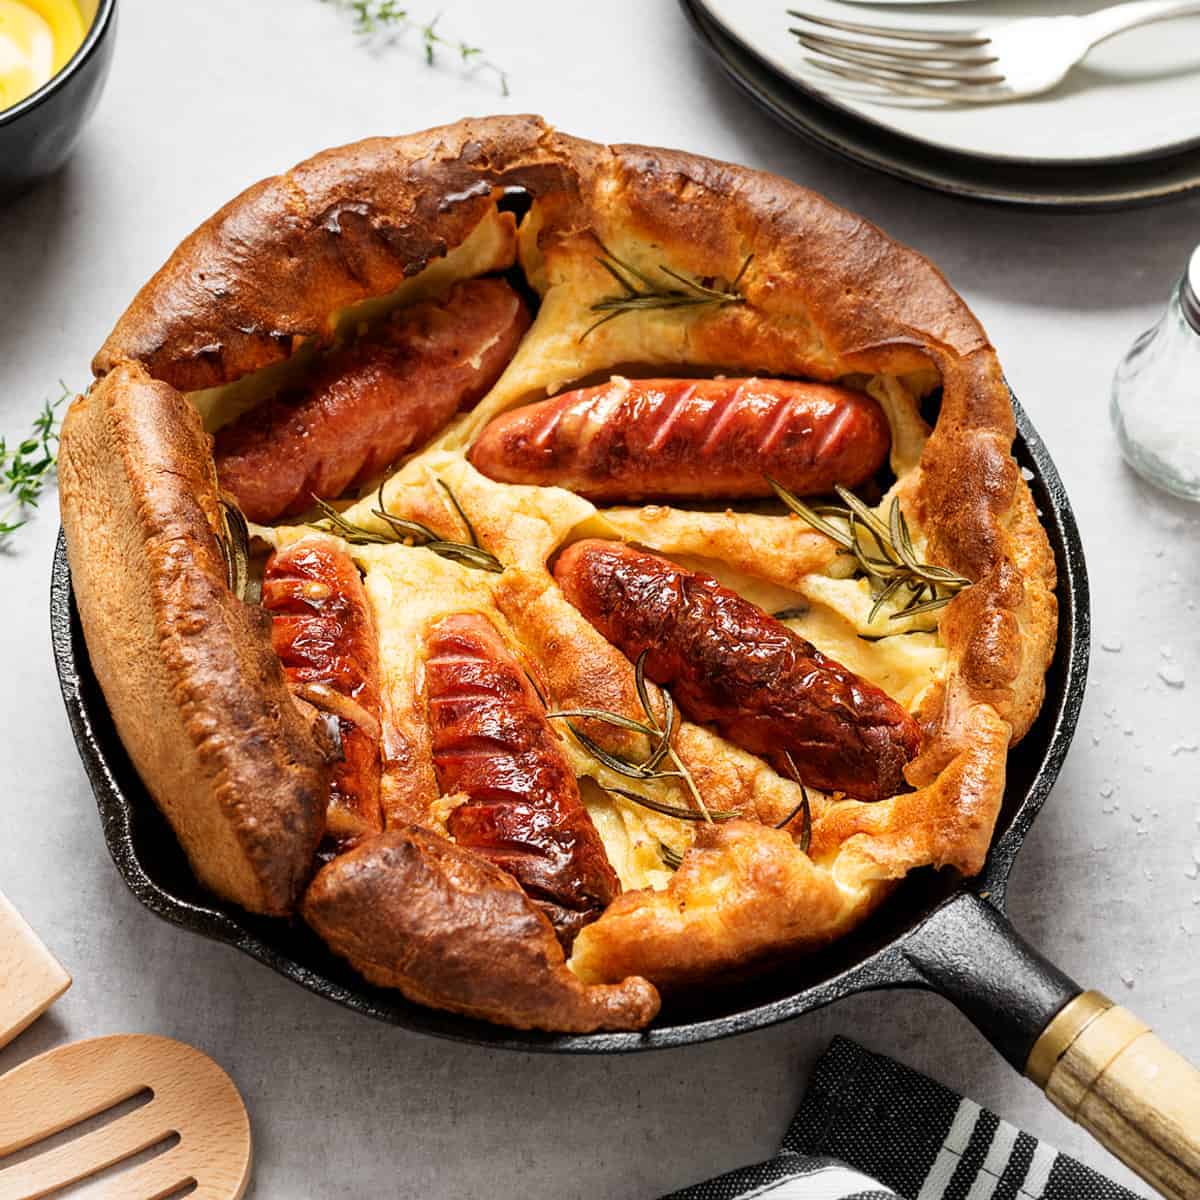 toad in the hole recipe best authentic british sausages yorkshire pudding